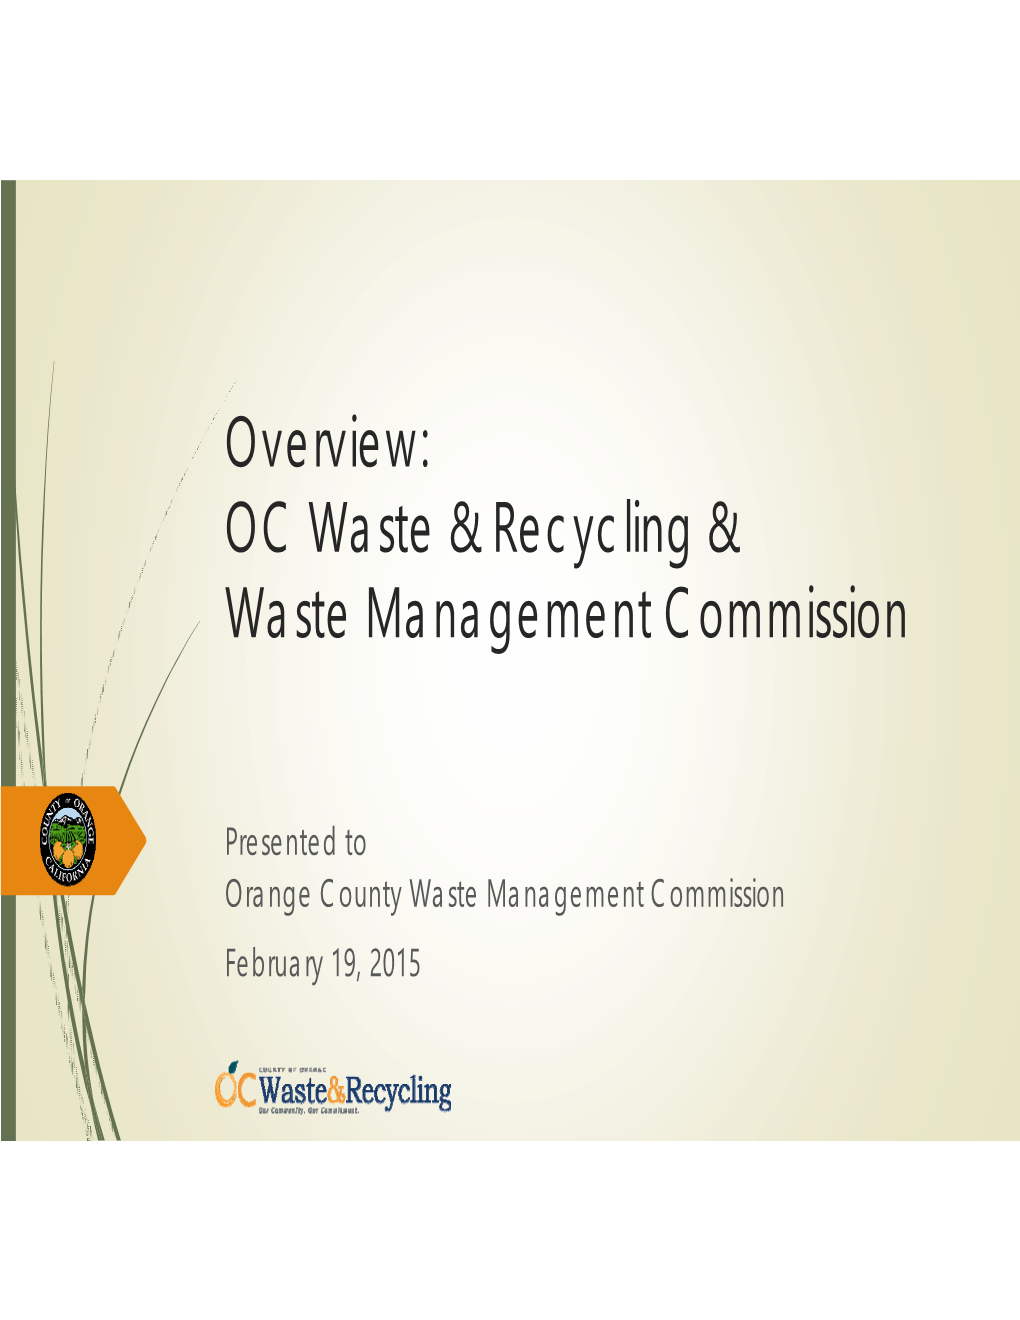 Overview: OC Waste & Recycling & Waste Management Commission